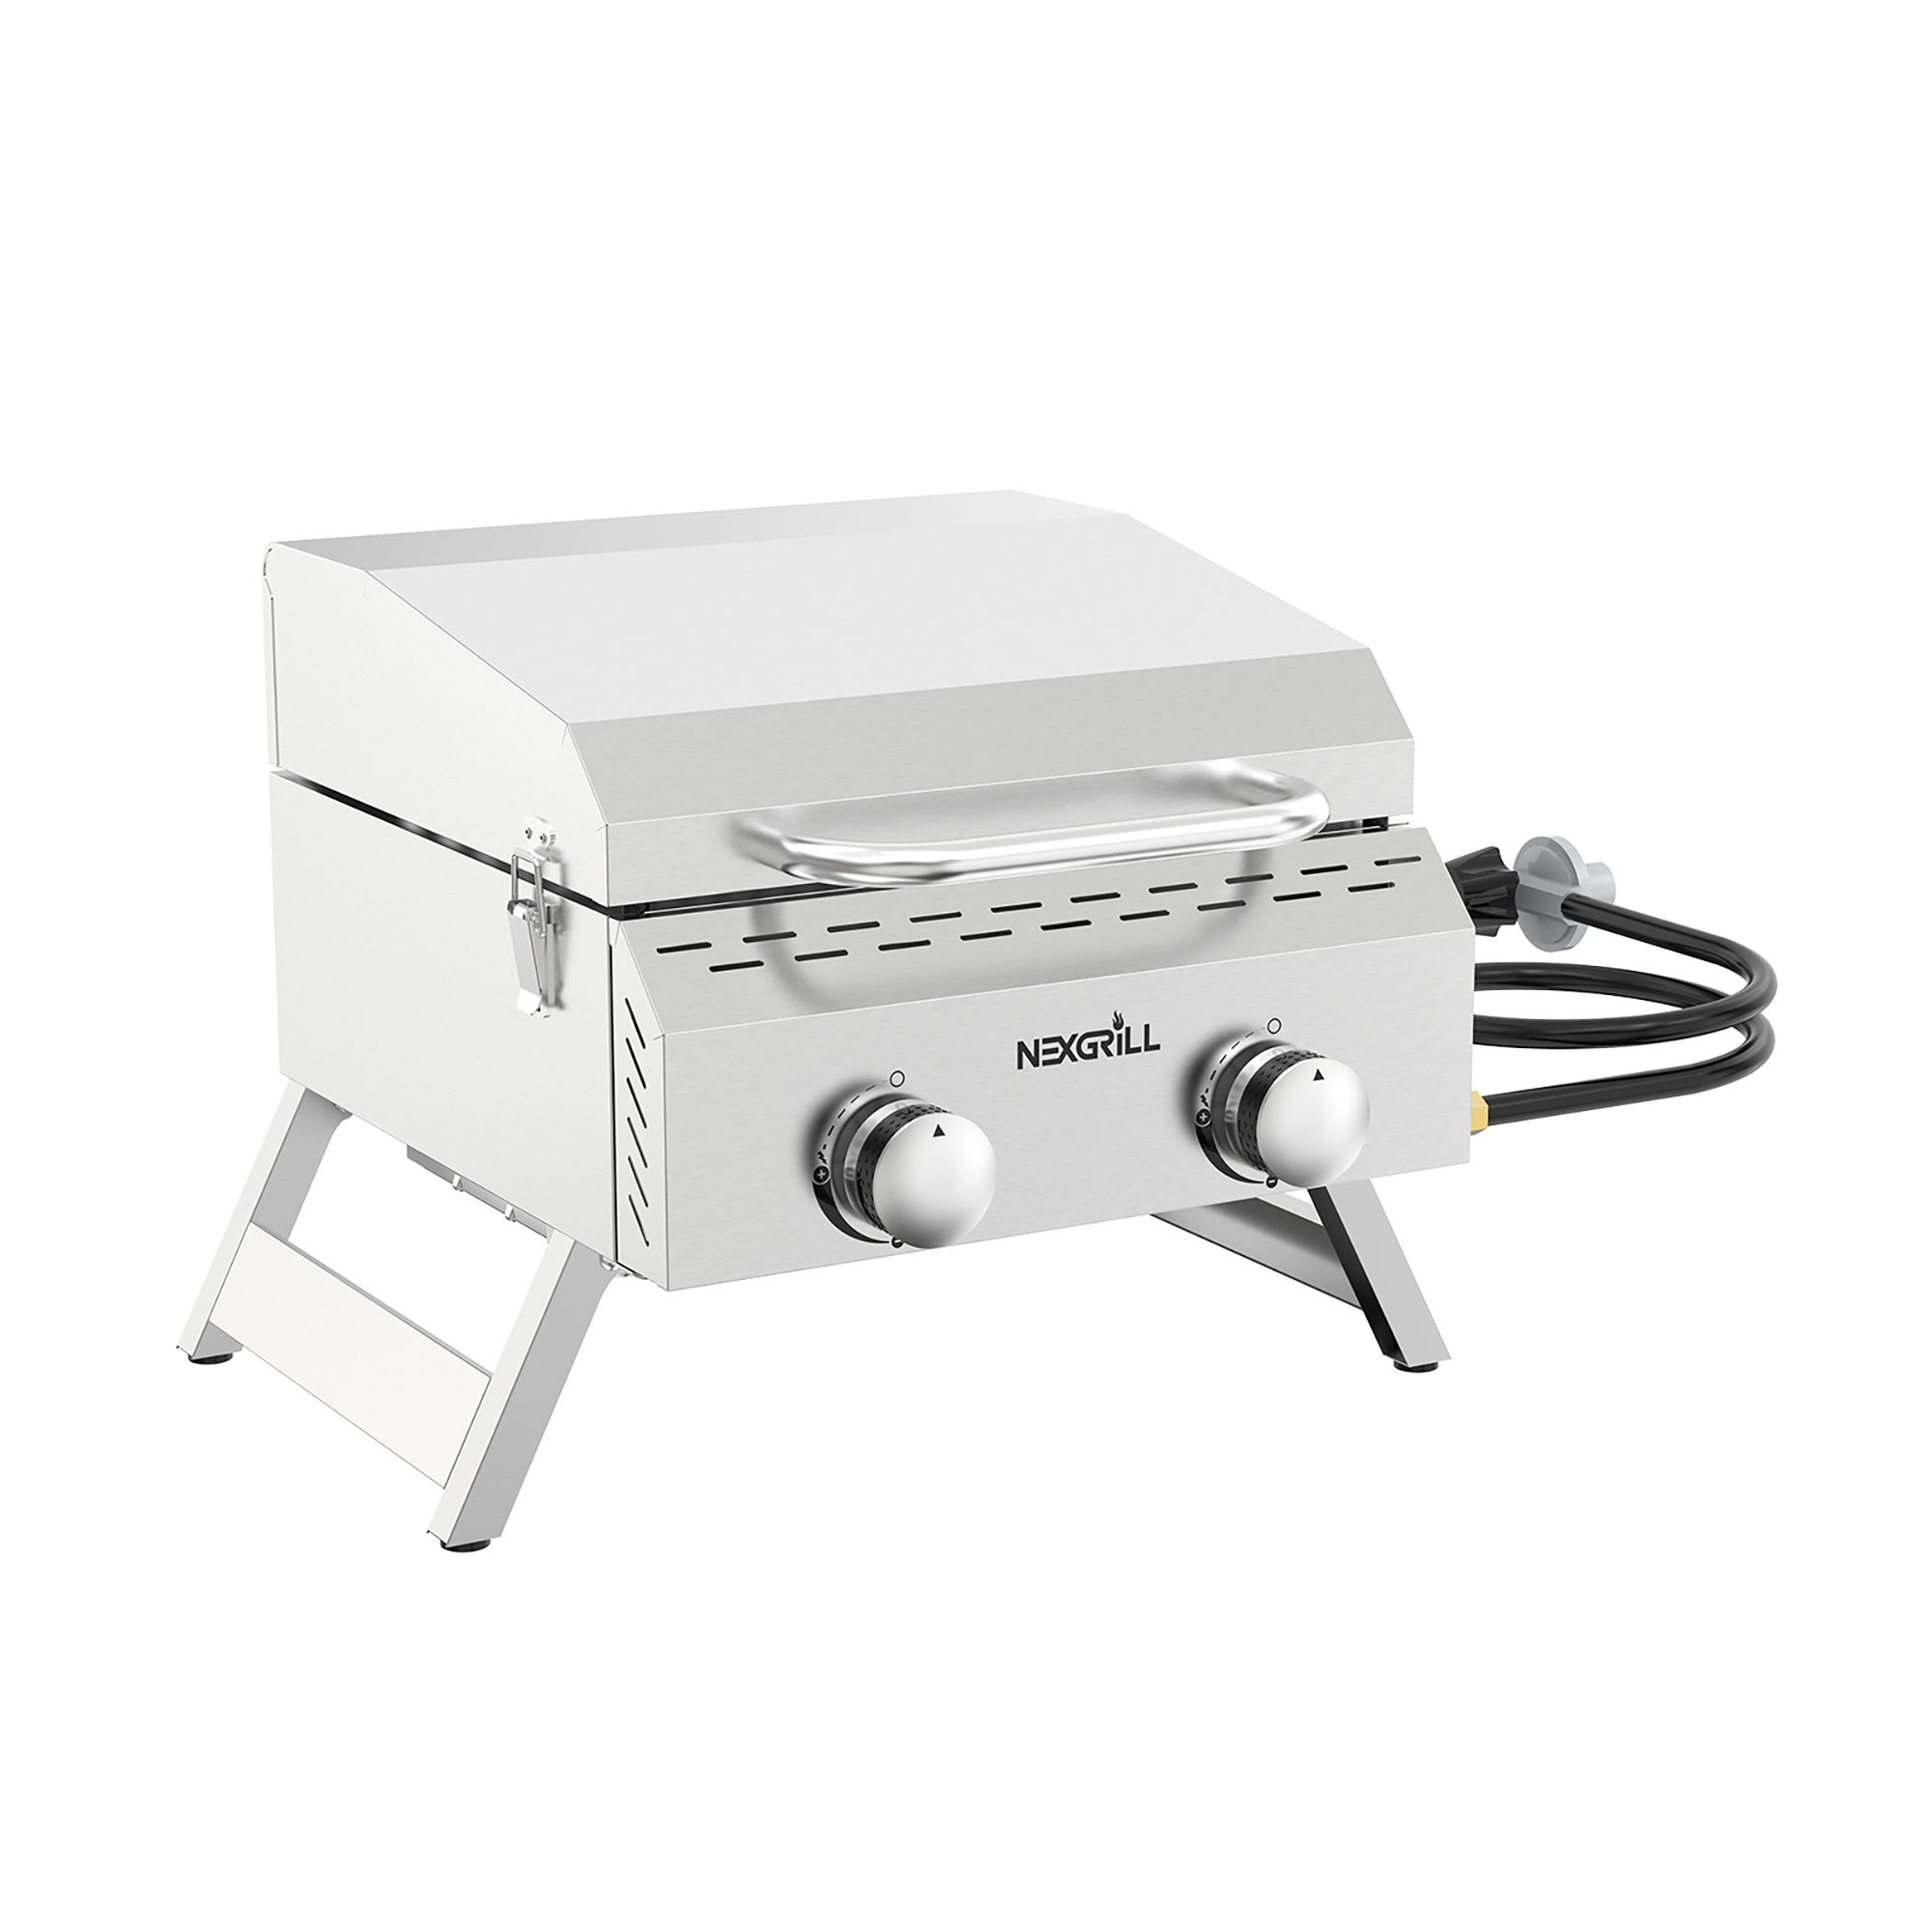 Nexgrill 2-Burner Propane Tabletop Grill with Cover Included